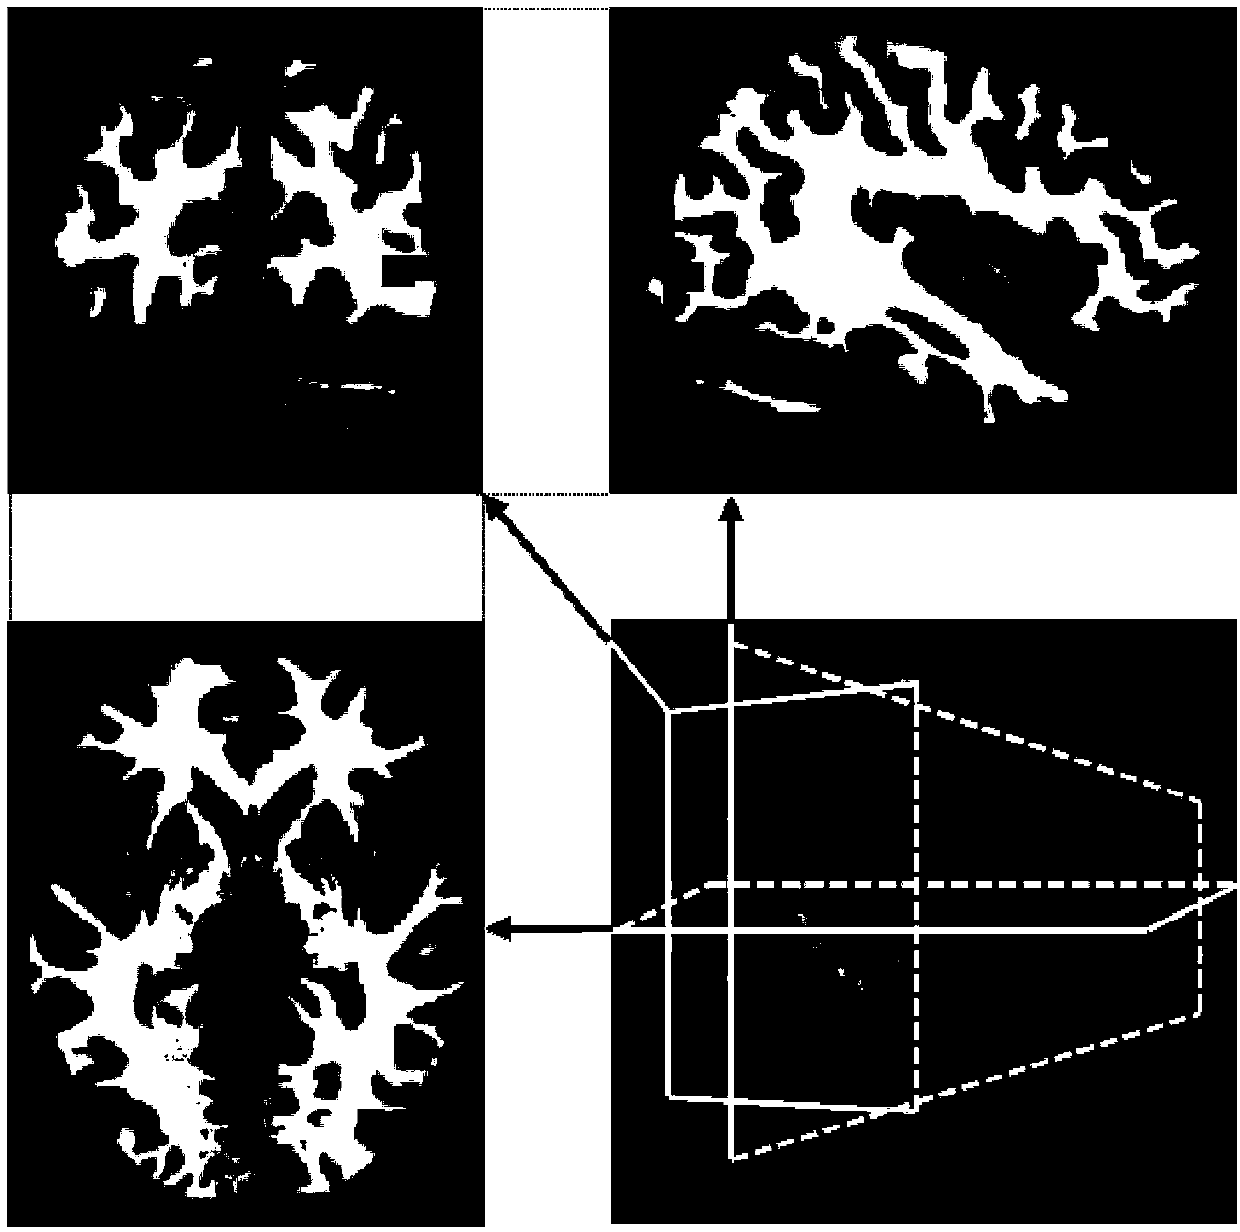 Epilepsy paradoxical discharge locus positioning method and system based on EEG-fMRI